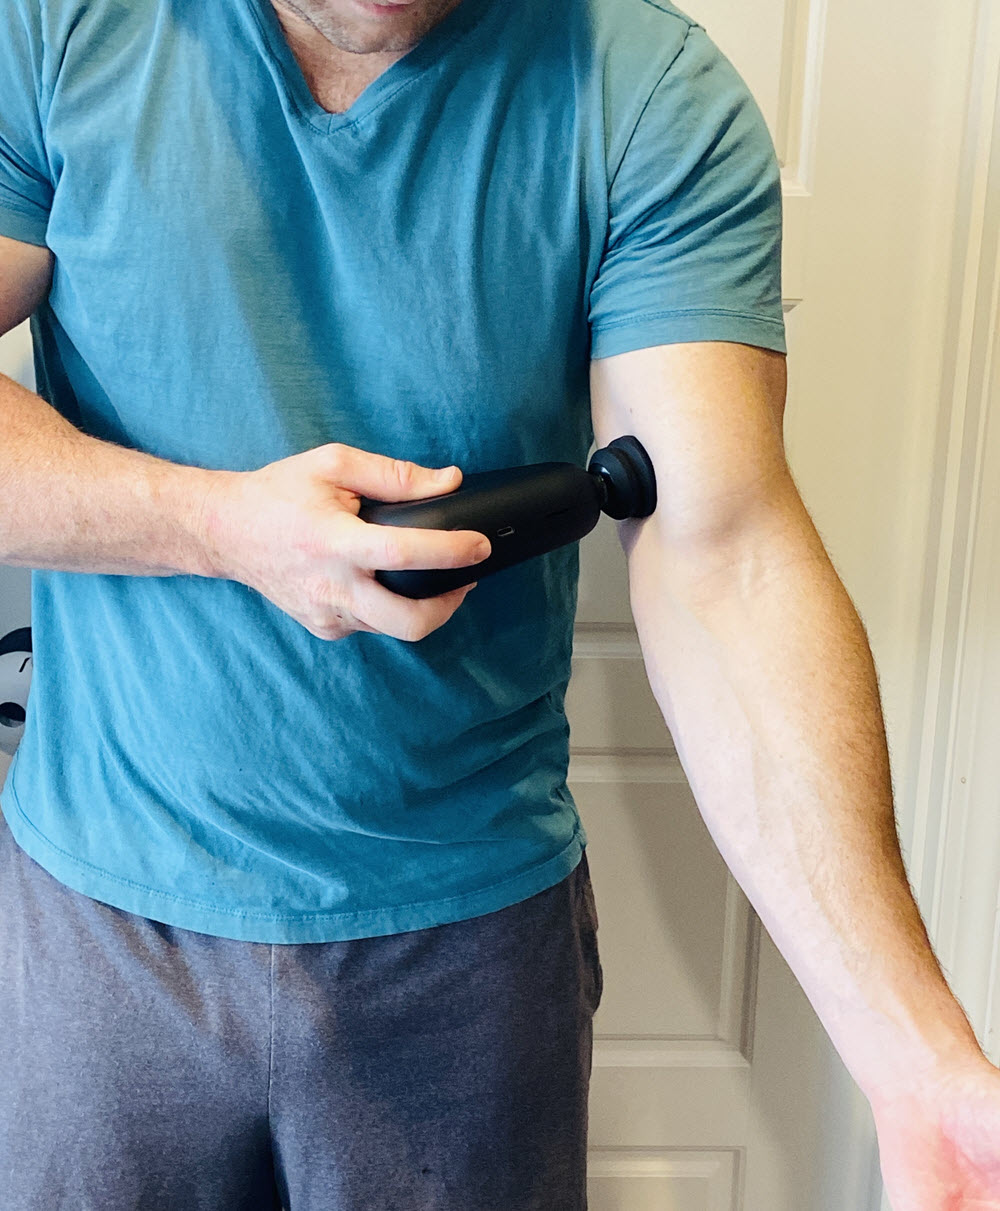 Unwrap Relaxation this Christmas with the Bob and Brad Air 2 Mini Massage Gun Bicep